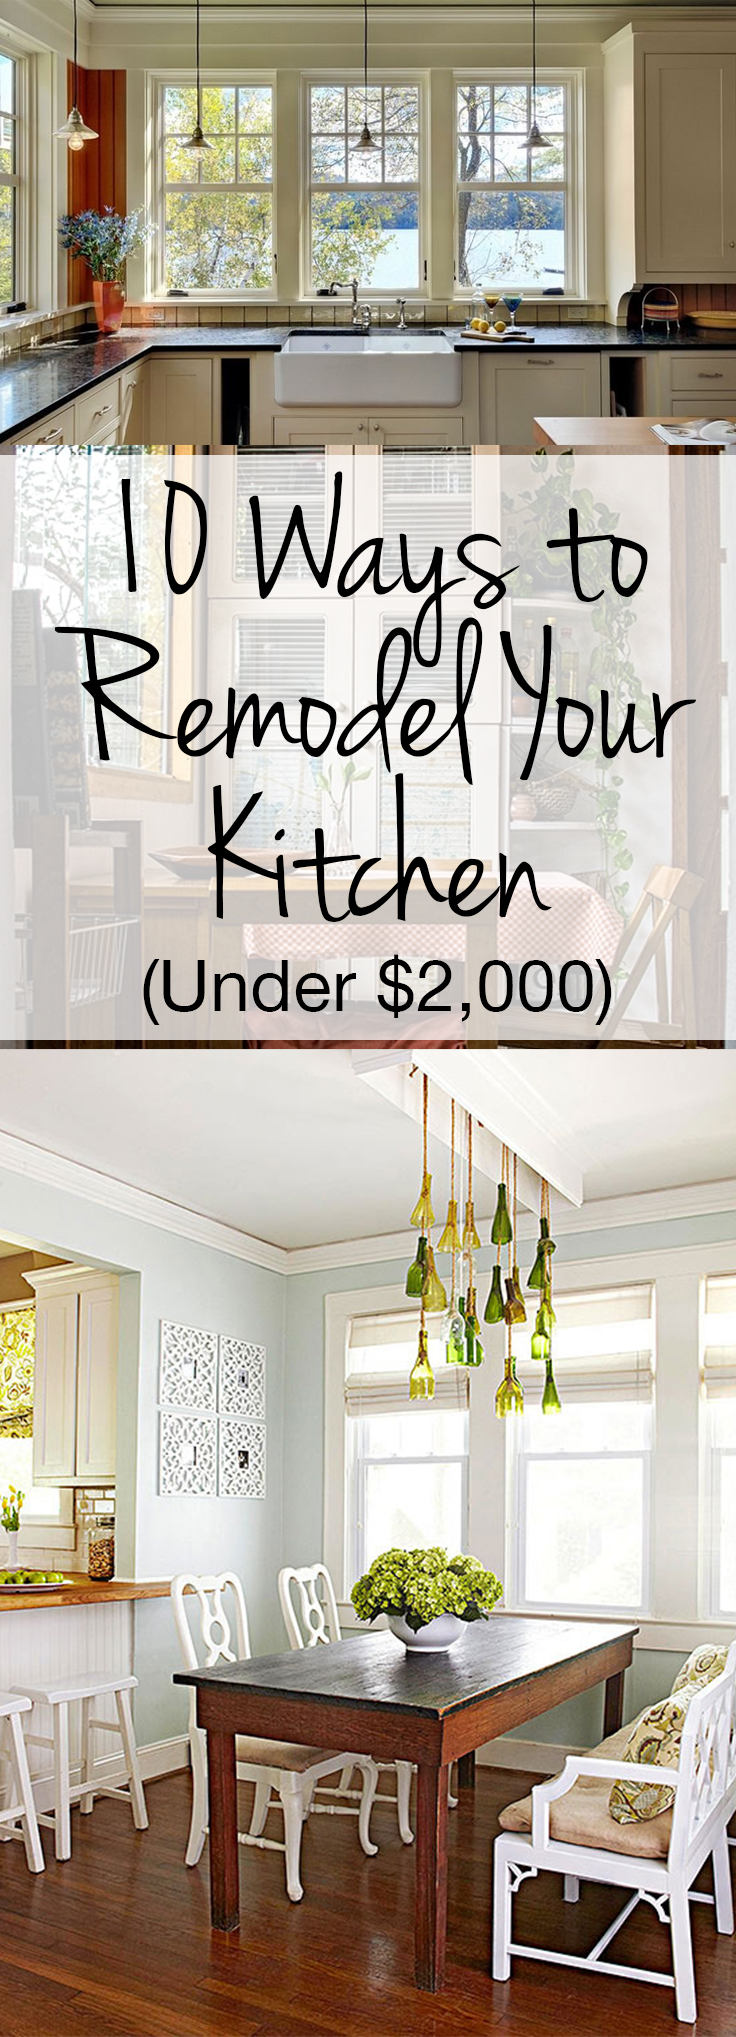 Kitchen, Kitchen Remodel, Cheap Kitchen Remodeling, DIY Kitchen Remodel, Kitchen Remodel Tips, Kitchen Remodel Tricks, Kitchen Remodeling Hacks, Easy Ways to Remodel Your Kitchen, How to Update Your Kitchen, Popular